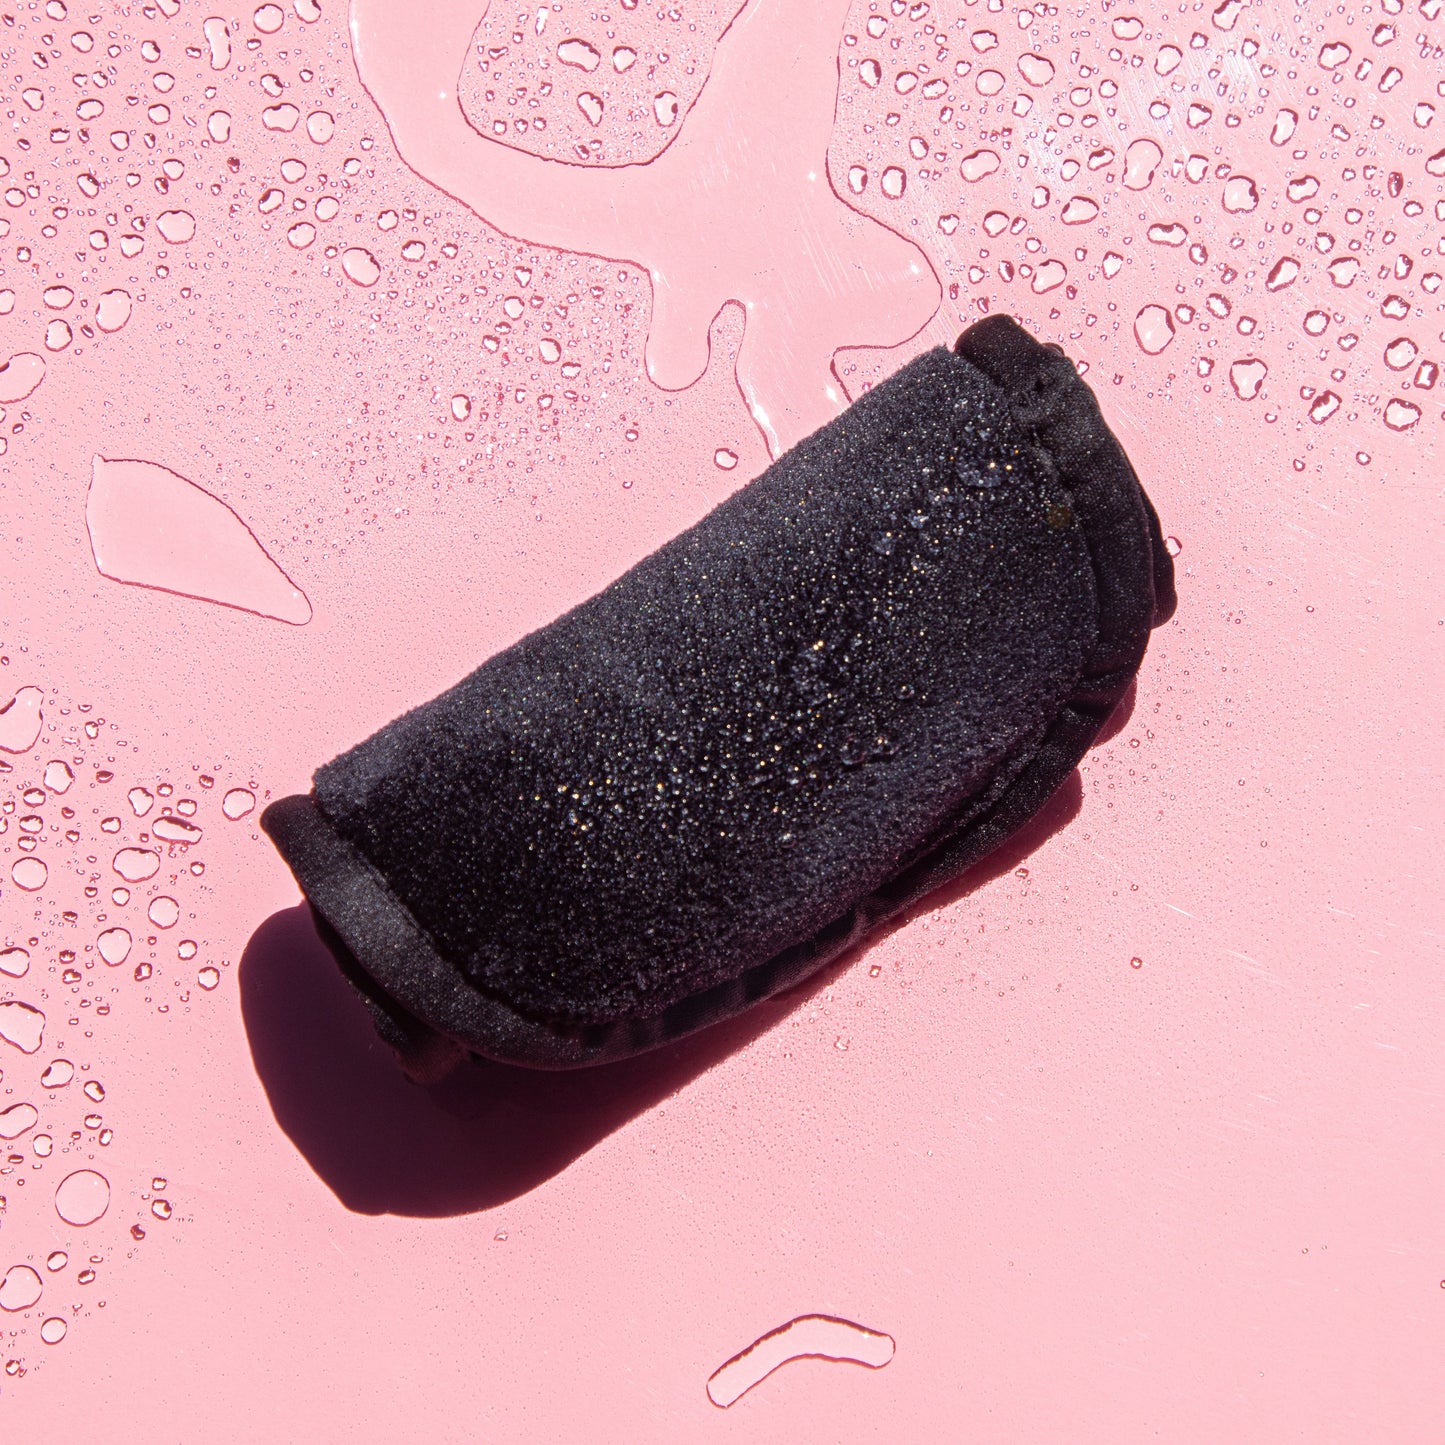 Rolled up Chic Black MakeUp Eraser surrounded by waterdrops.